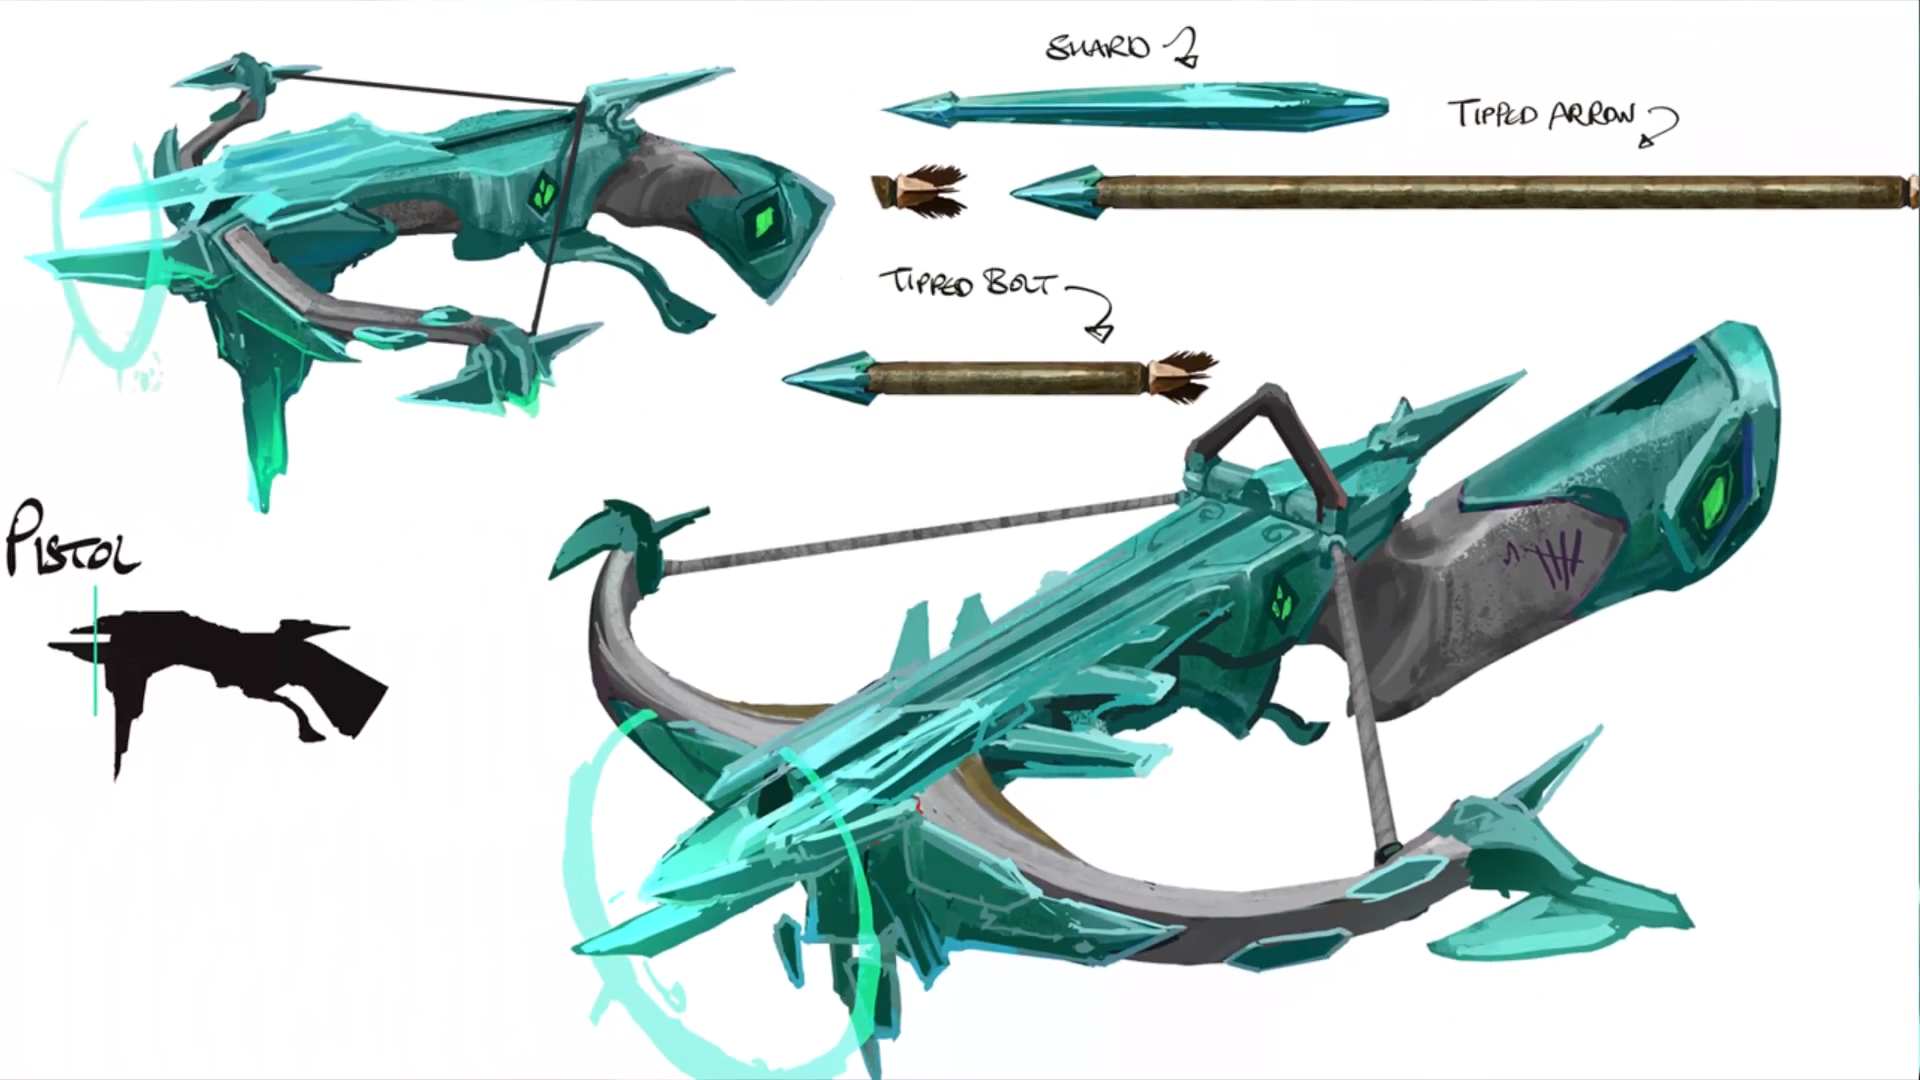 http://images1.wikia.nocookie.net/__cb20130602084625/runescape/images/4/42/Ascension_crossbow_concept_art.png